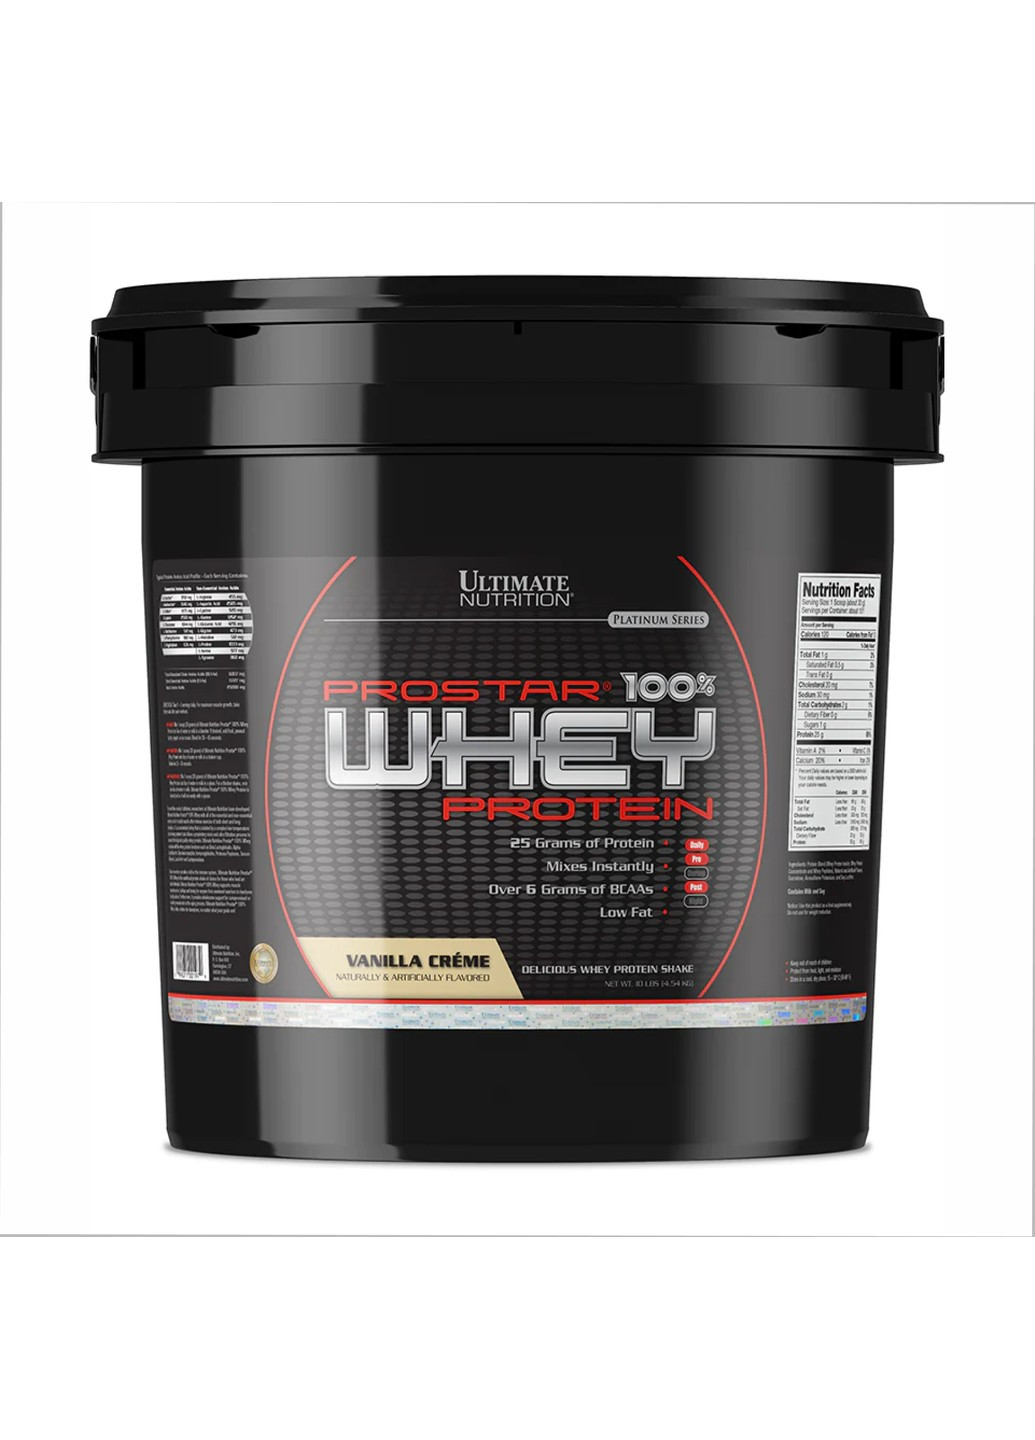 Prostar Whey 10lb - 4540g Cookies Cream Ultimate Nutrition (270937564)